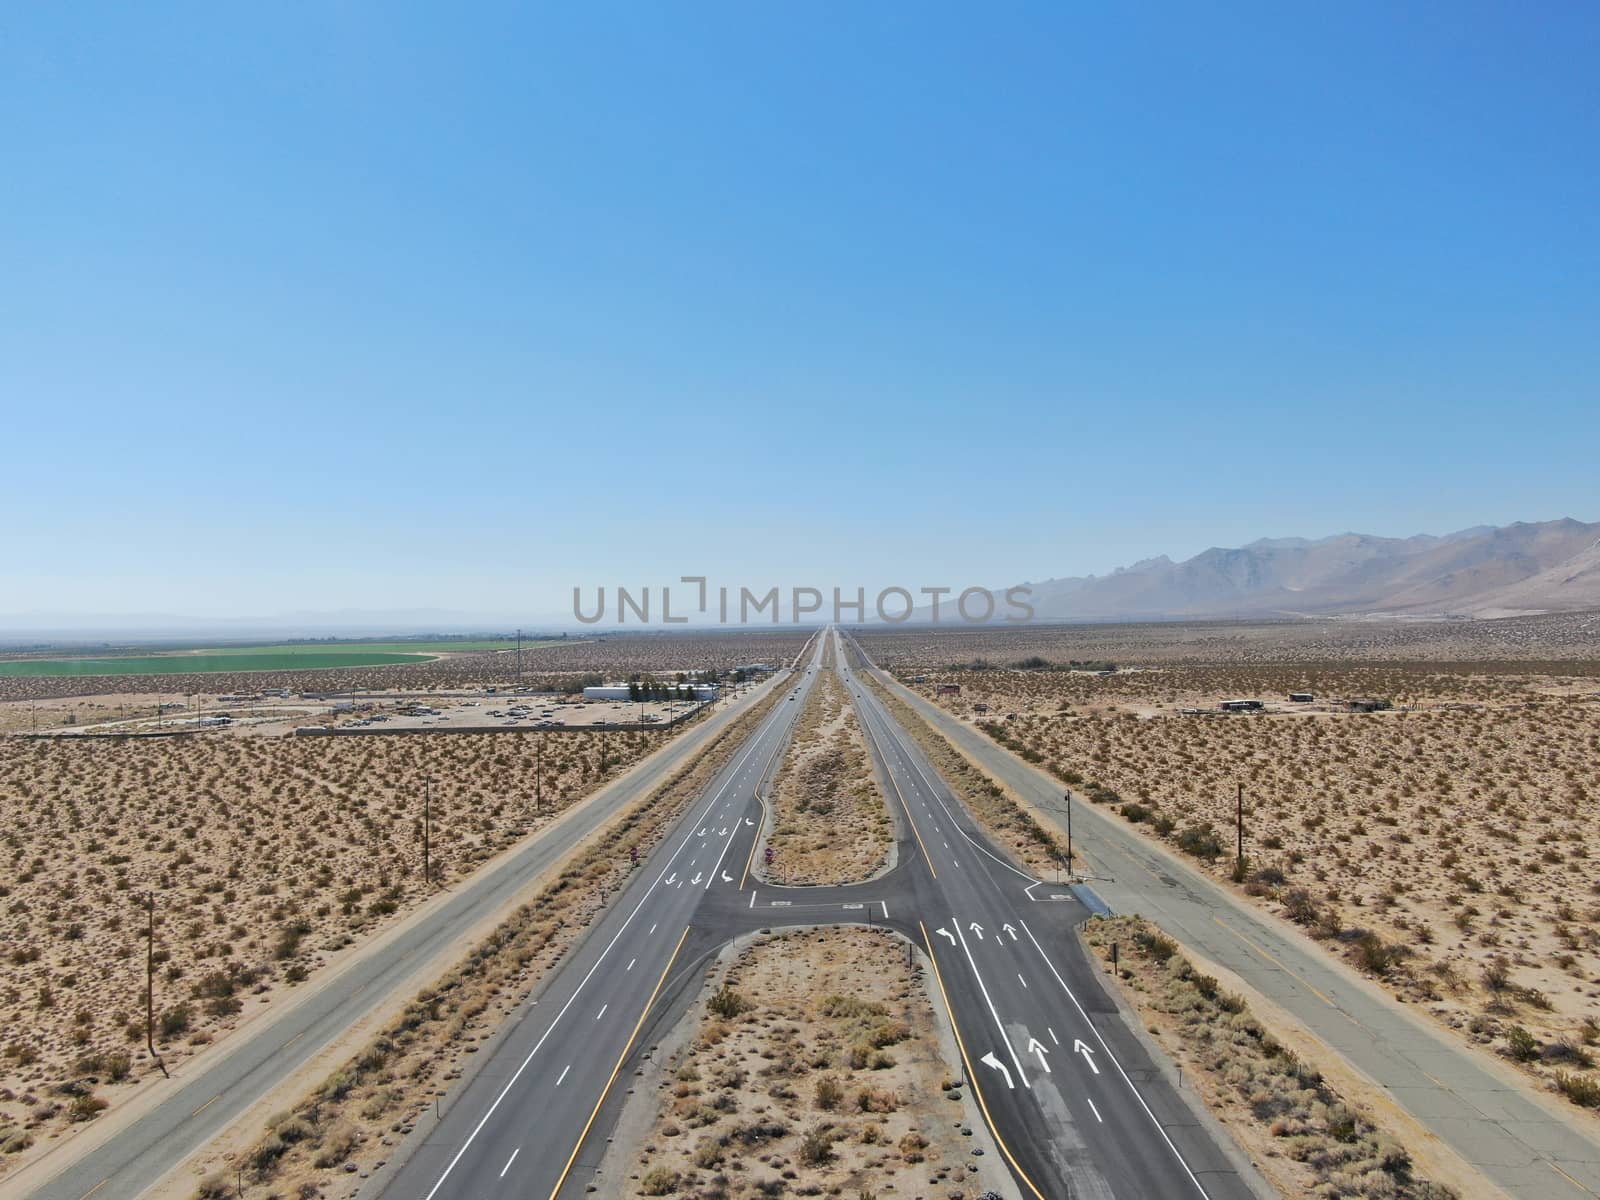 Aerial view of road in the middle of the desert under blue sky in California's Mojave desert, near Ridgecrest.  by Bonandbon